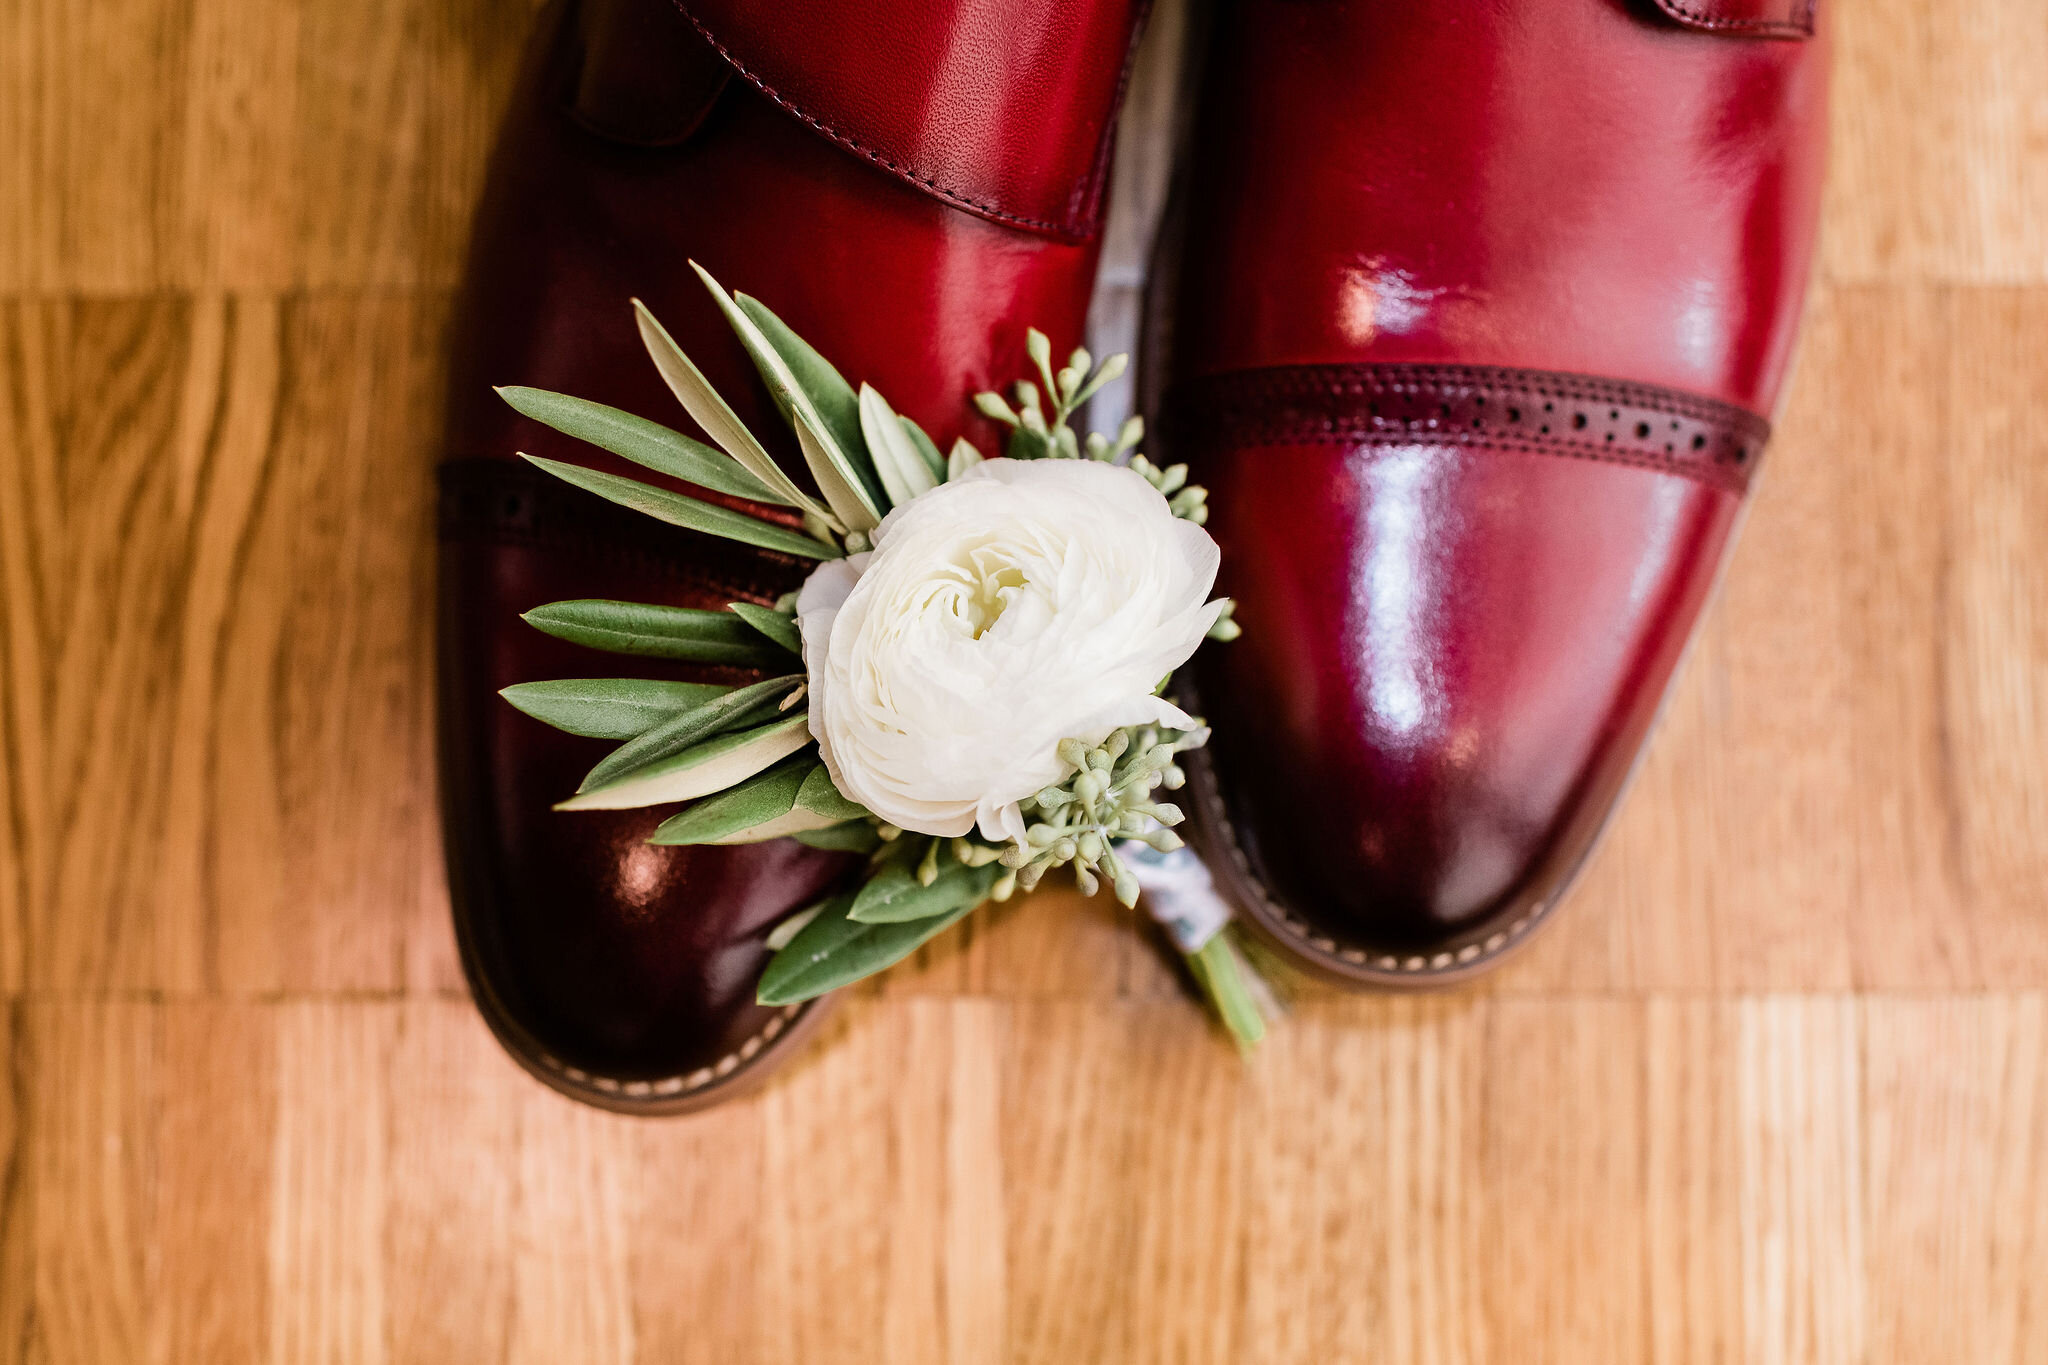 Groom's shoes and boutonniere